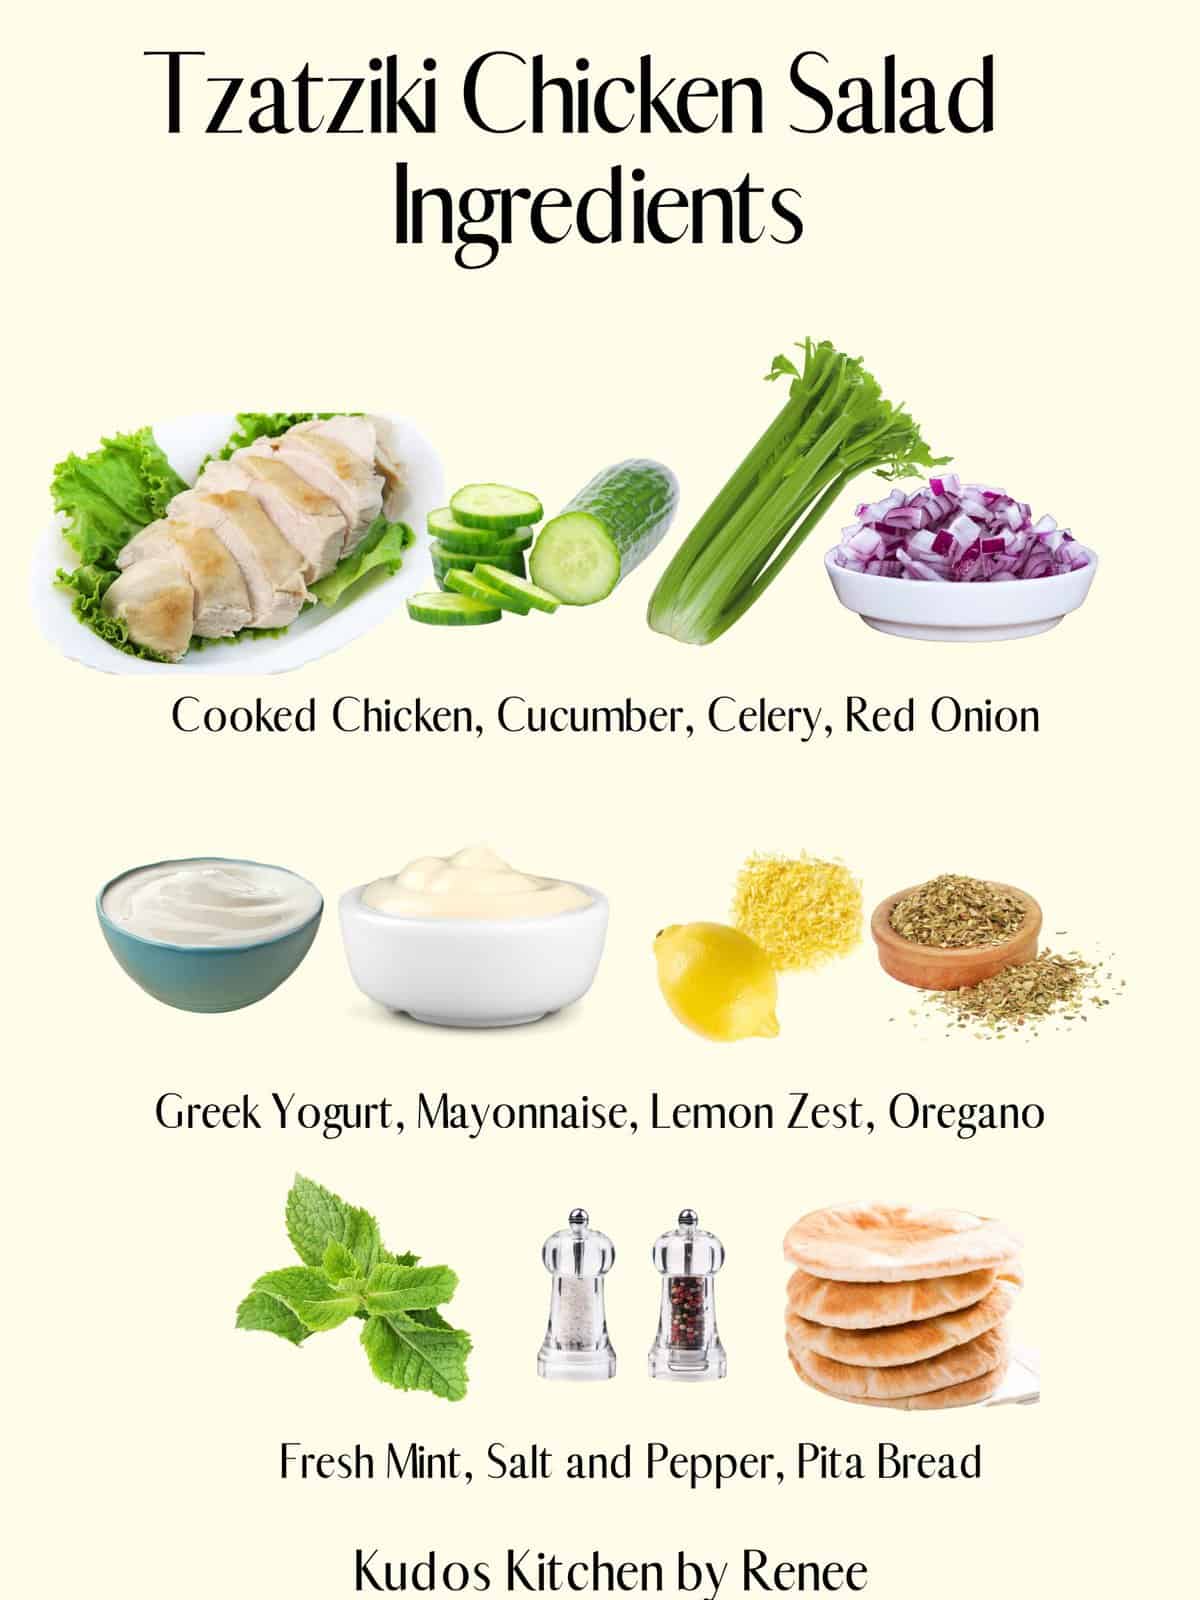 The visual ingredient list for making Tzatziki Chicken Salad along with text.